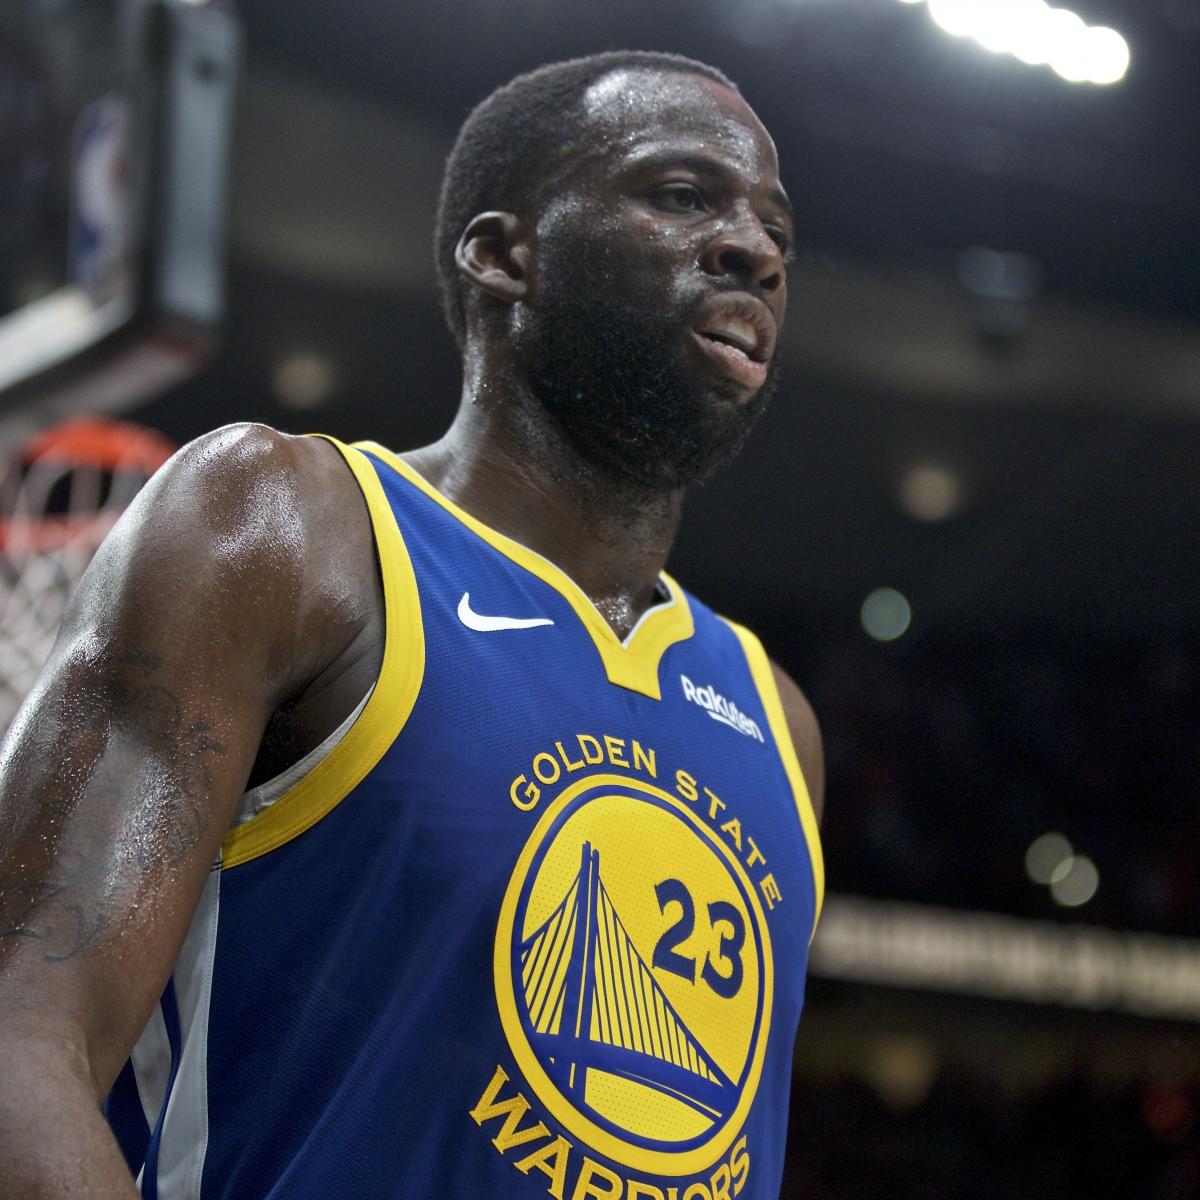 Draymond Green is the Defensive Player of the year and it's not close.